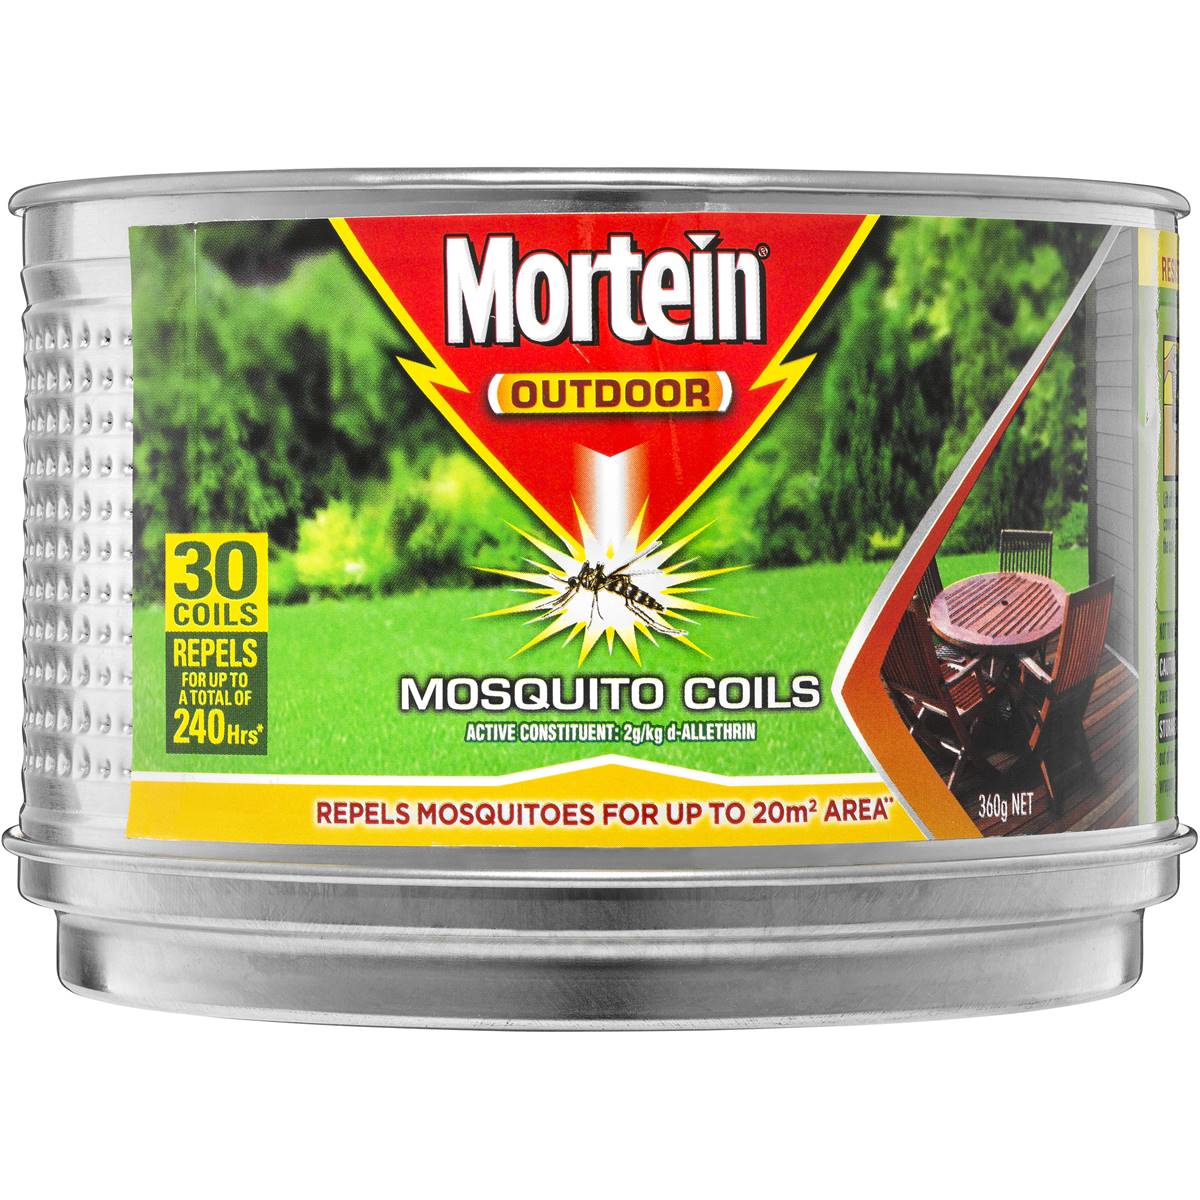 Mortein Mosquito Coils Value Pack